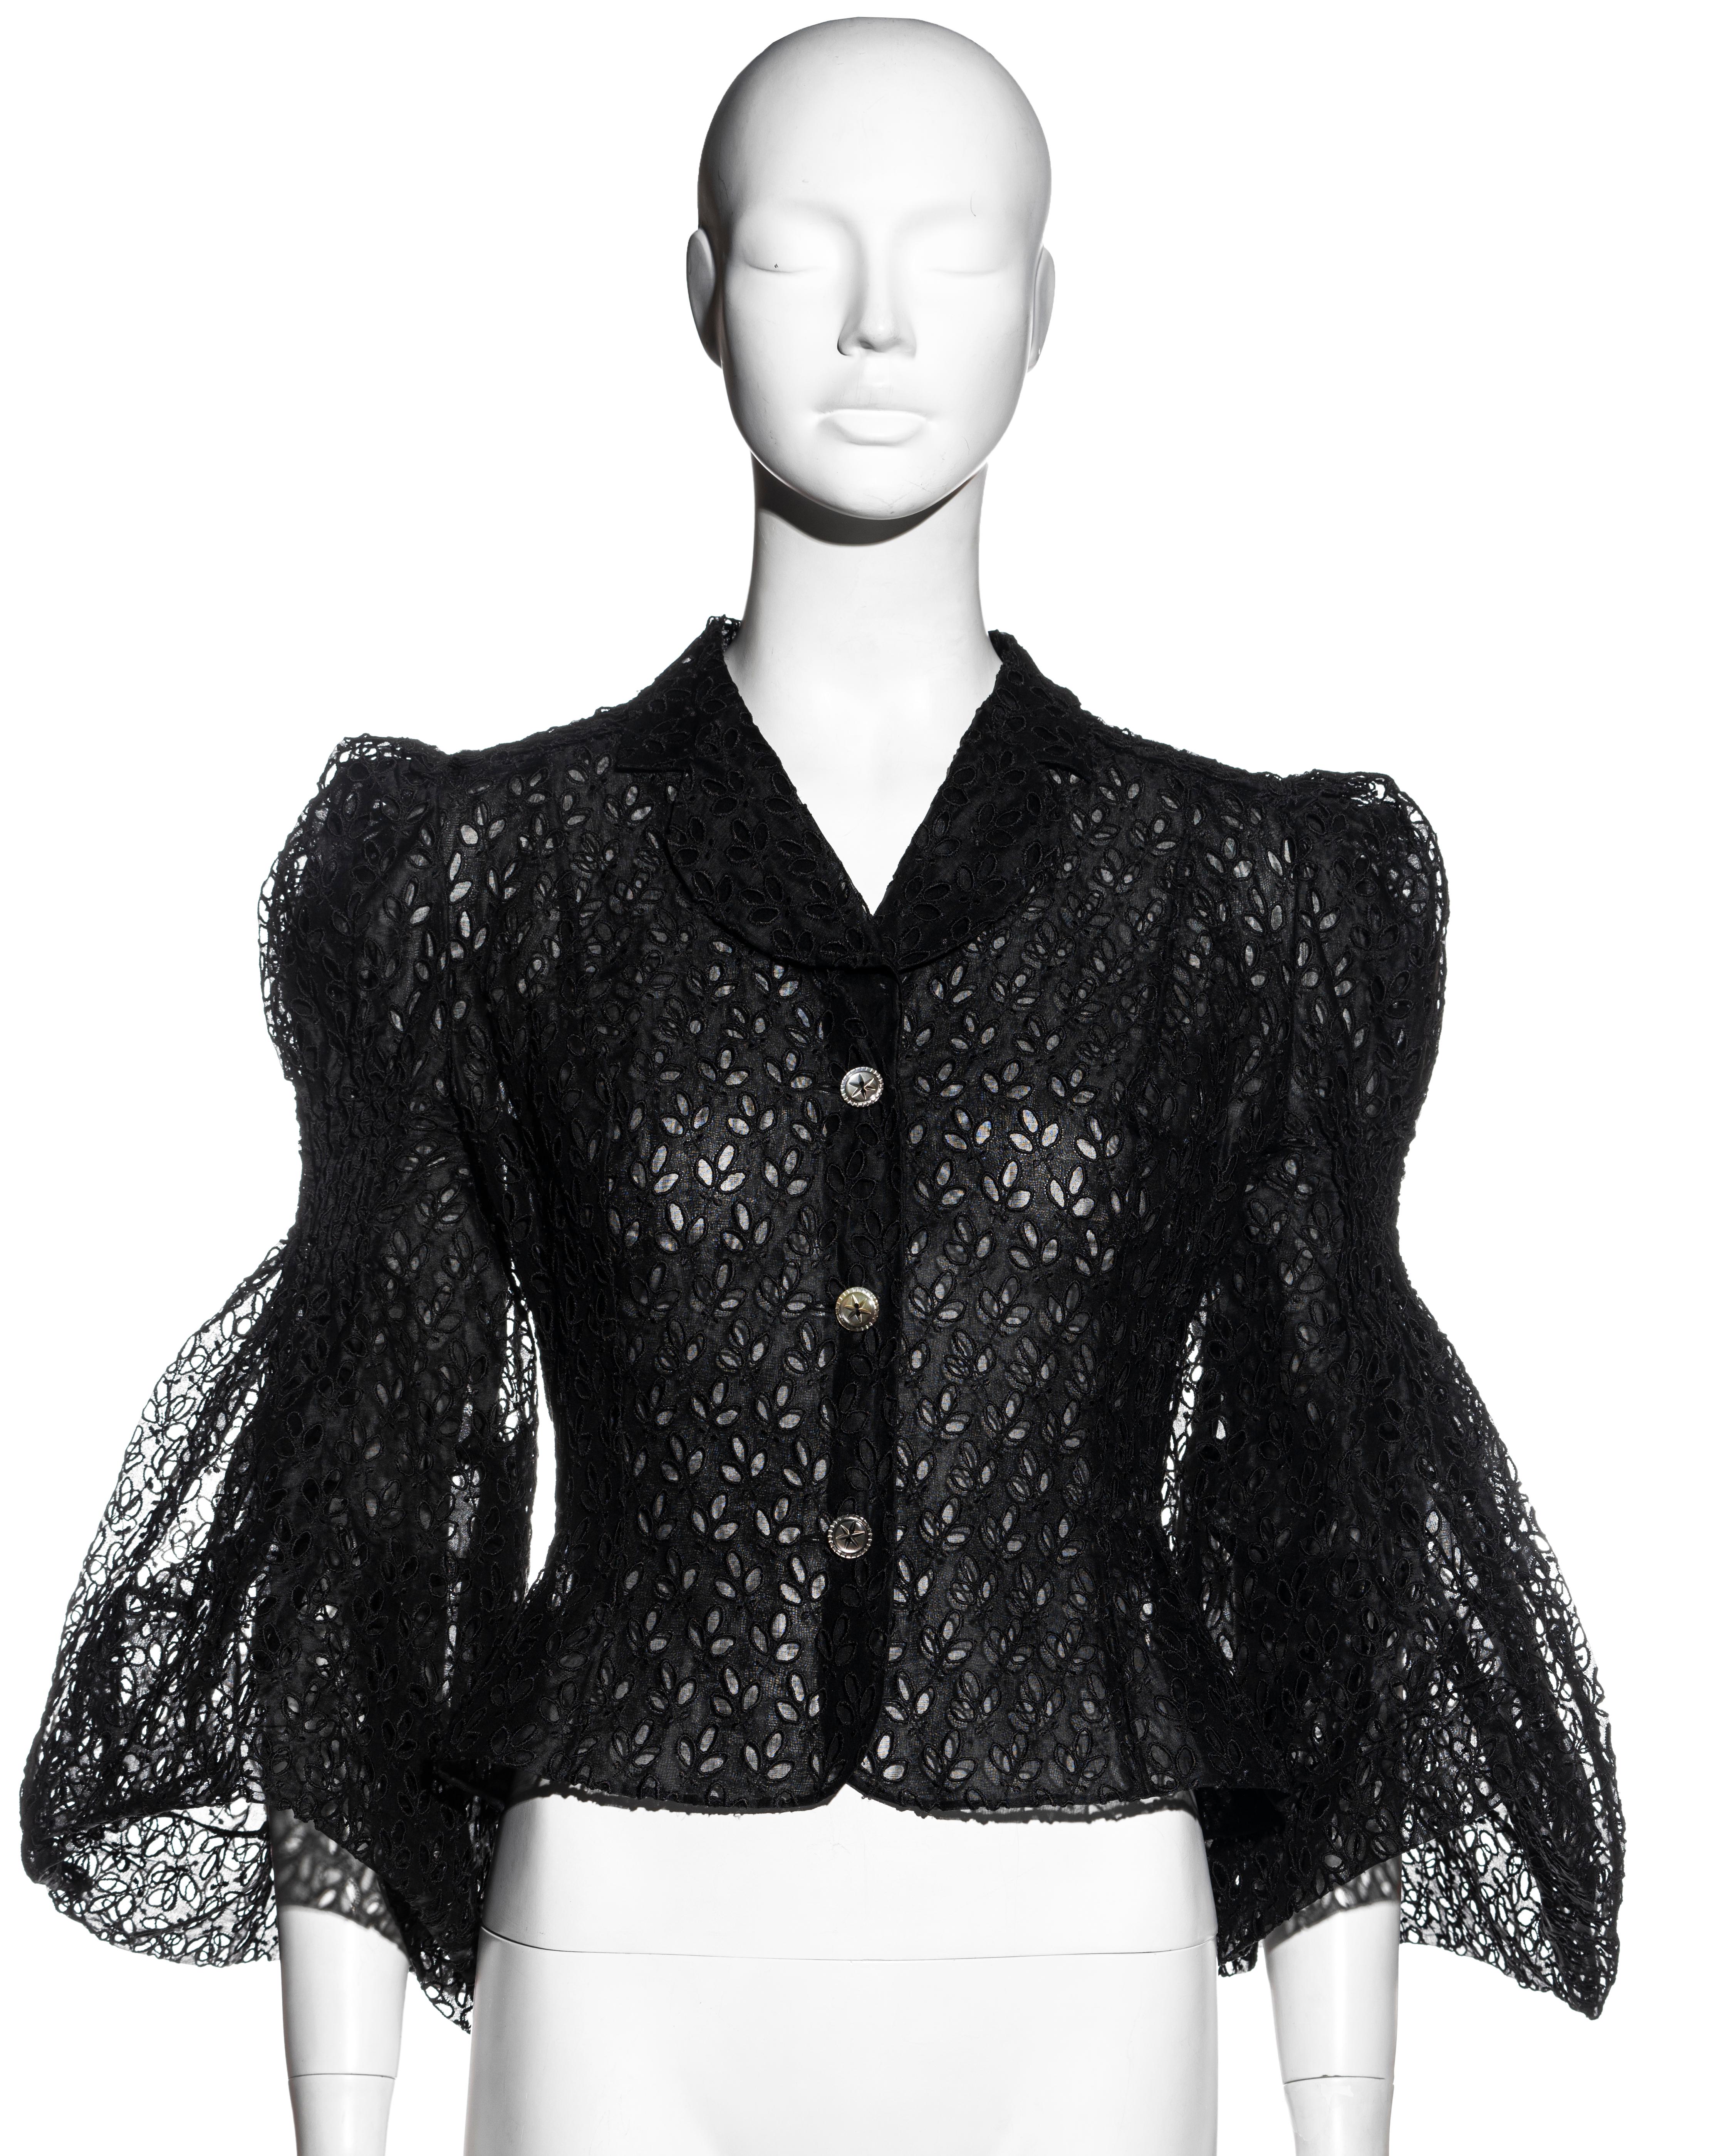 ▪ John Galliano black cutwork cotton organza blouse 
▪ Smocking to the upper sleeve 
▪ Puff shoulders 
▪ Wide bell sleeves 
▪ Organza lining 
▪ Overlay: 66% Cotton, 34% Rayon - Lining: 100% Cotton
▪ FR 40 - UK 12 - US 8
▪ Spring-Summer 1996